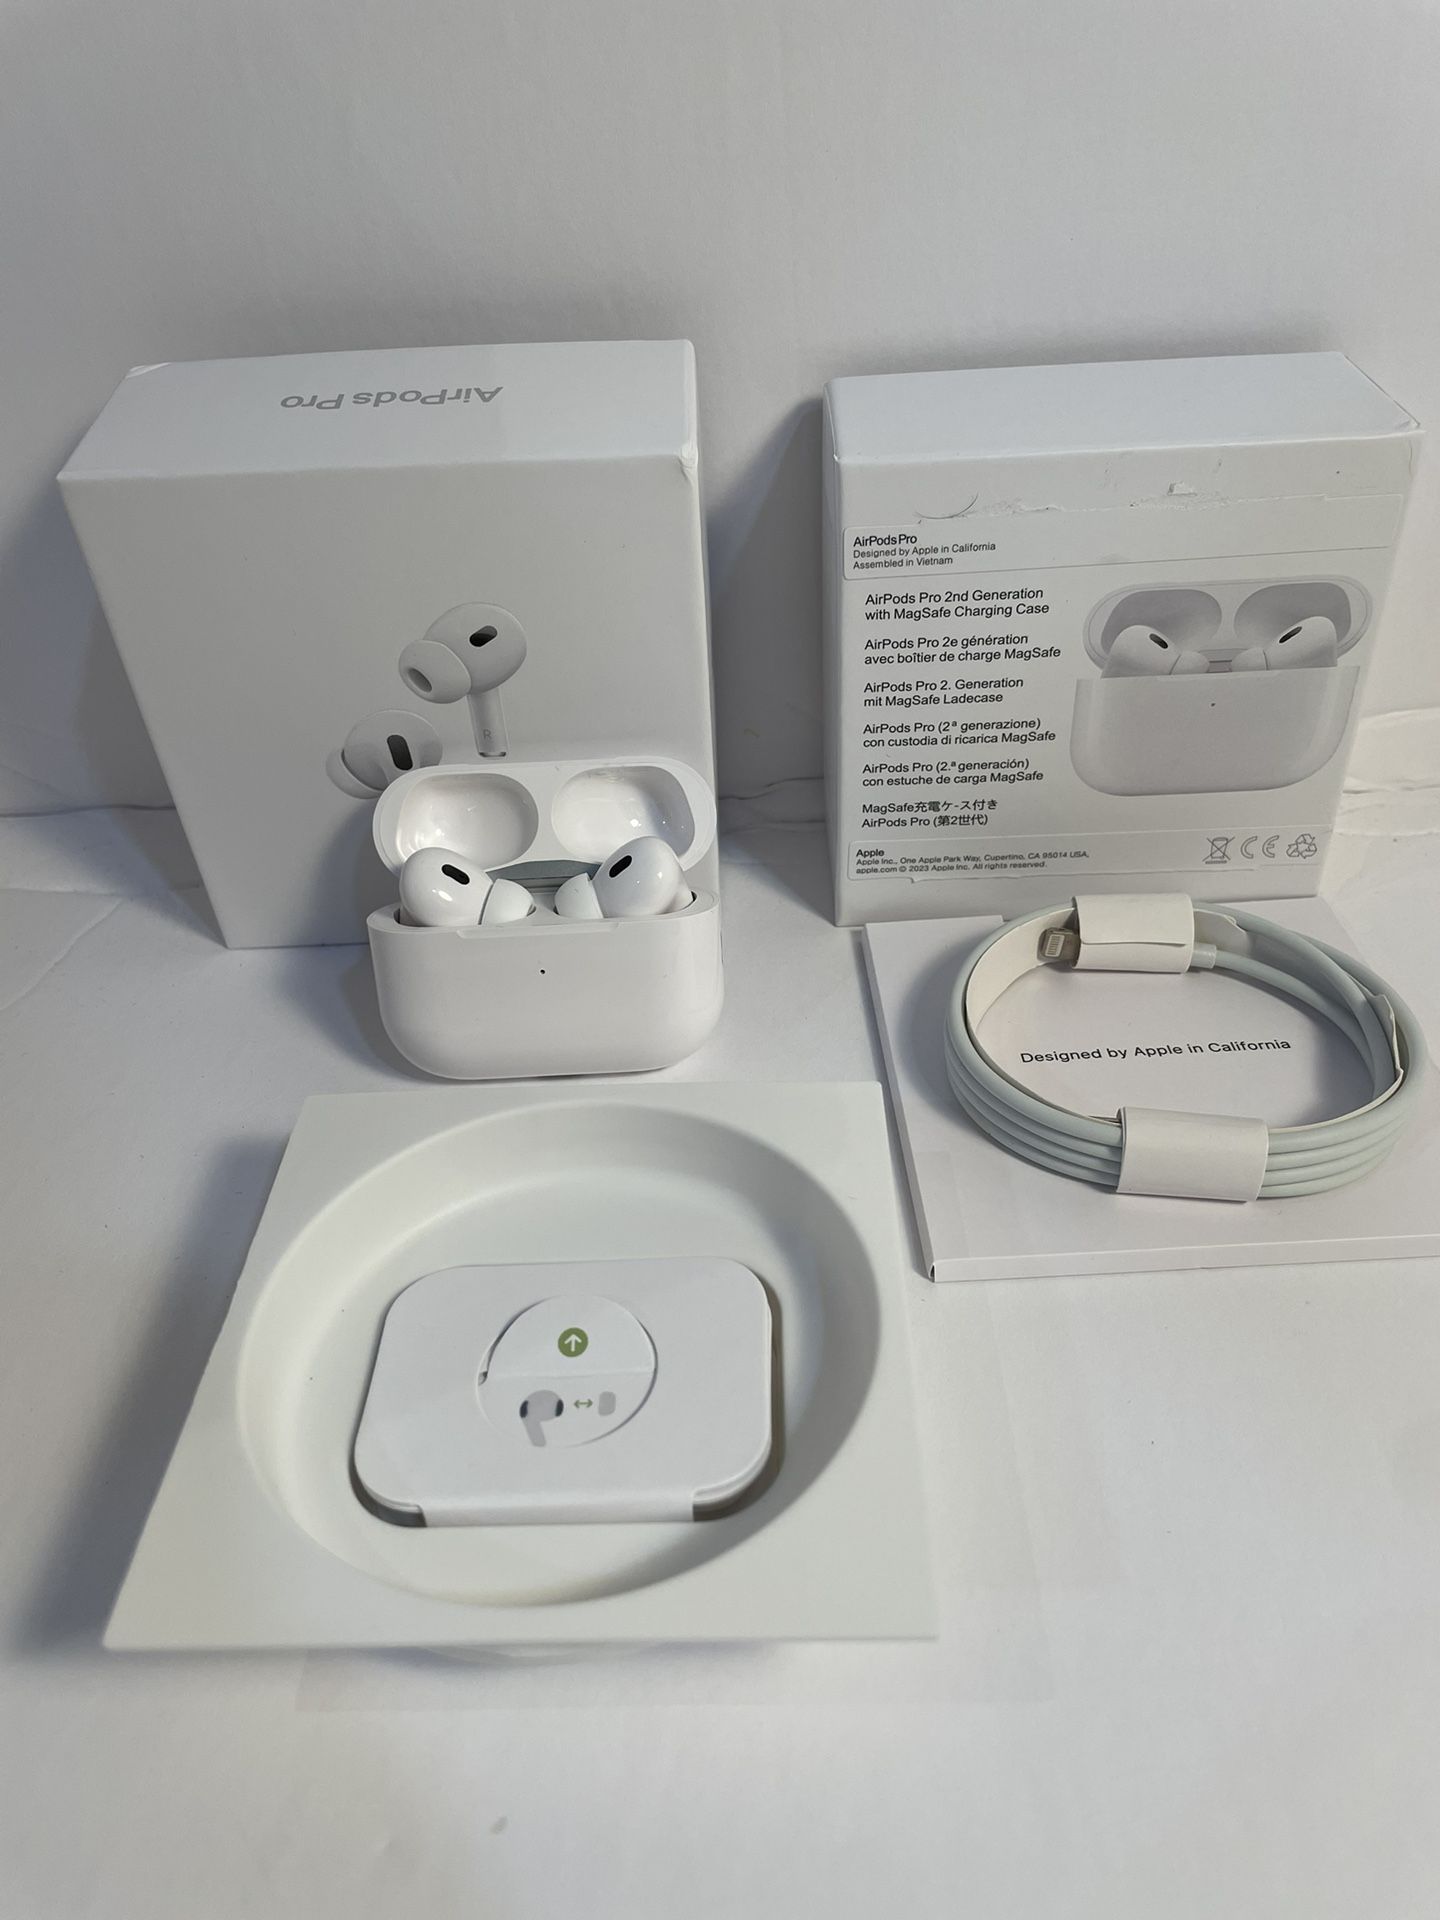 Apple Airpod Pro 2nd Generation with Magsafe Charging Case